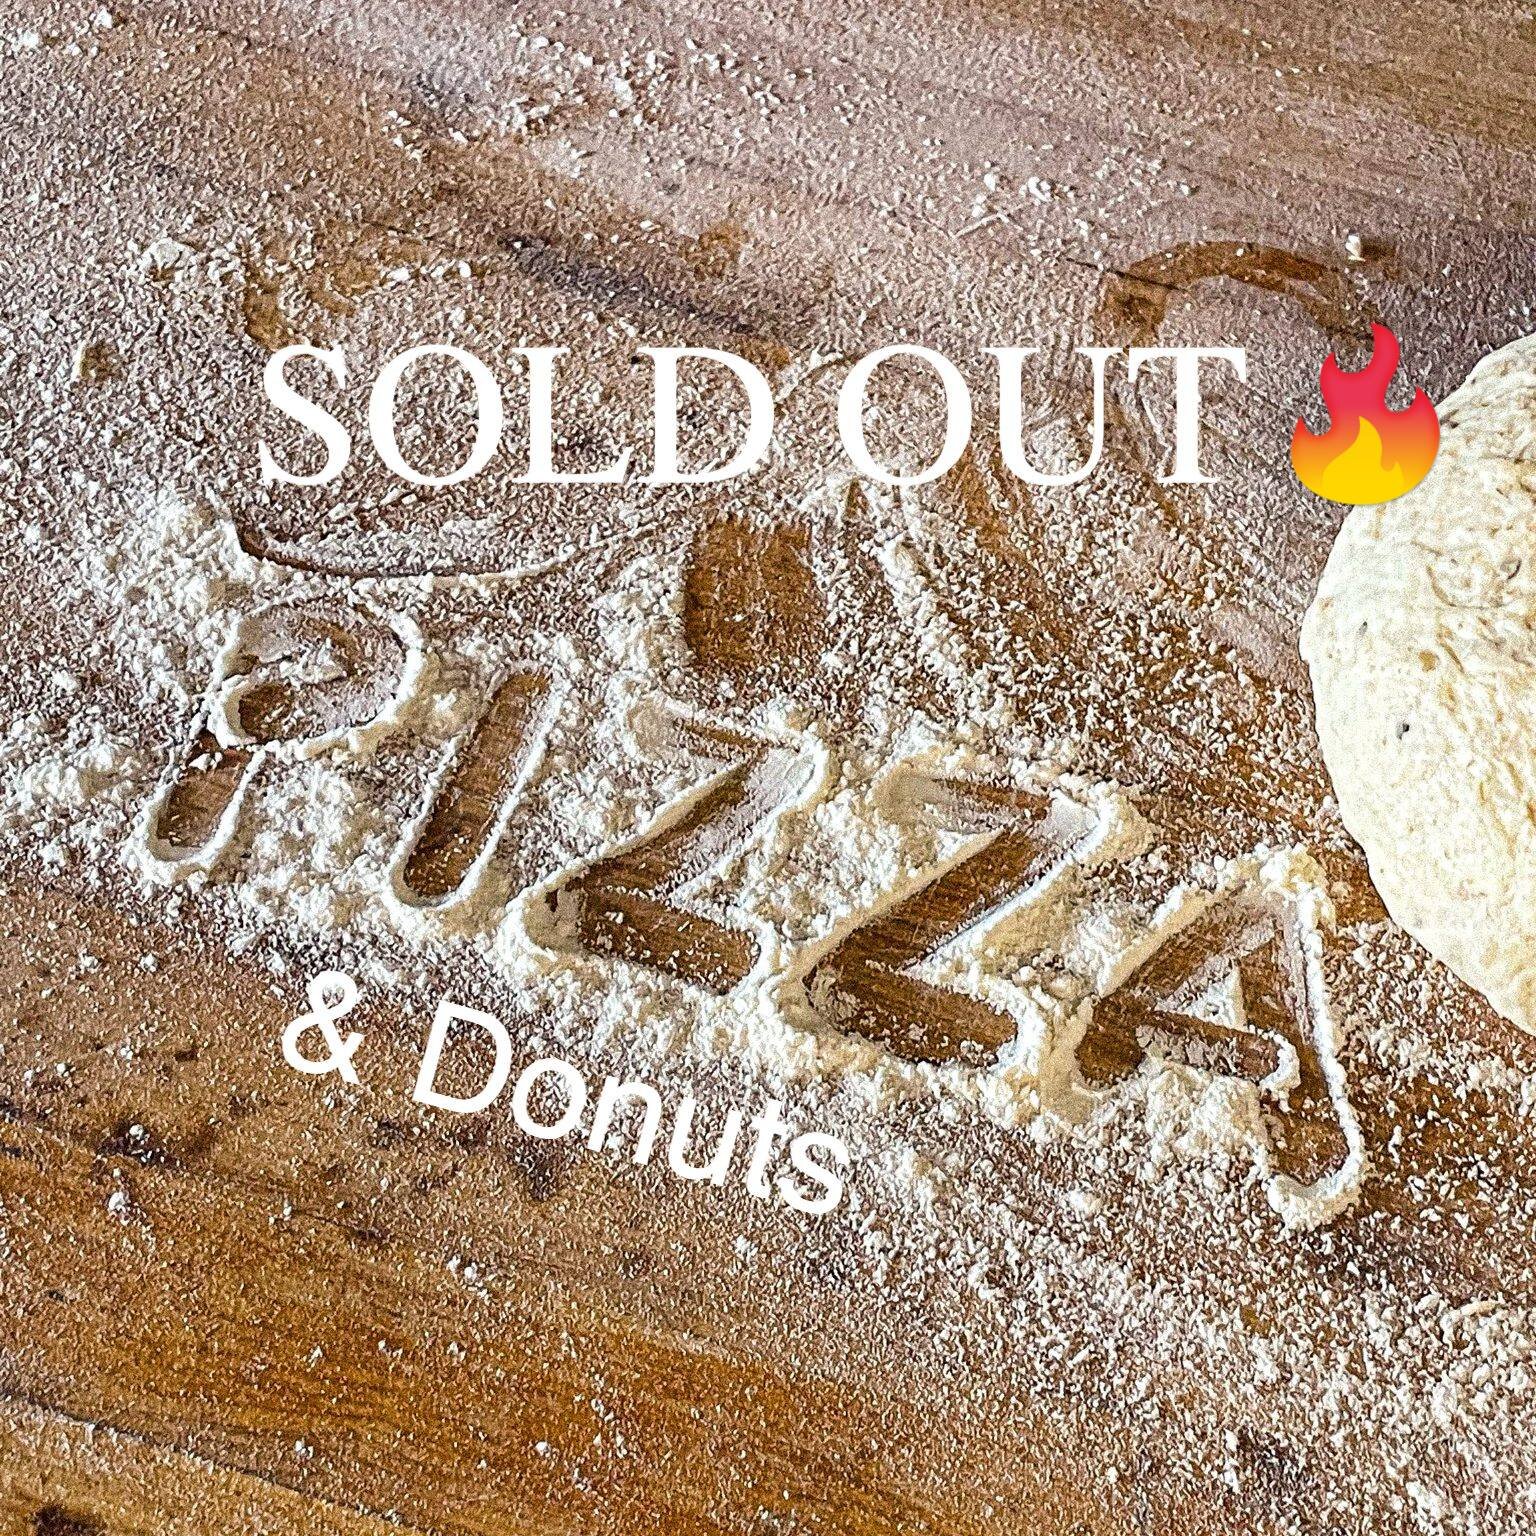 Yo!! SOLD OUT of PIZZA and DONUTS!! Cayman showing all their local love!! We set out 2 days worth of dough but you all took that as a challenge. Thank you!!

If you missed us tonight for dinner, you can catch us again on tomorrow from 1pm to 9pm. We 